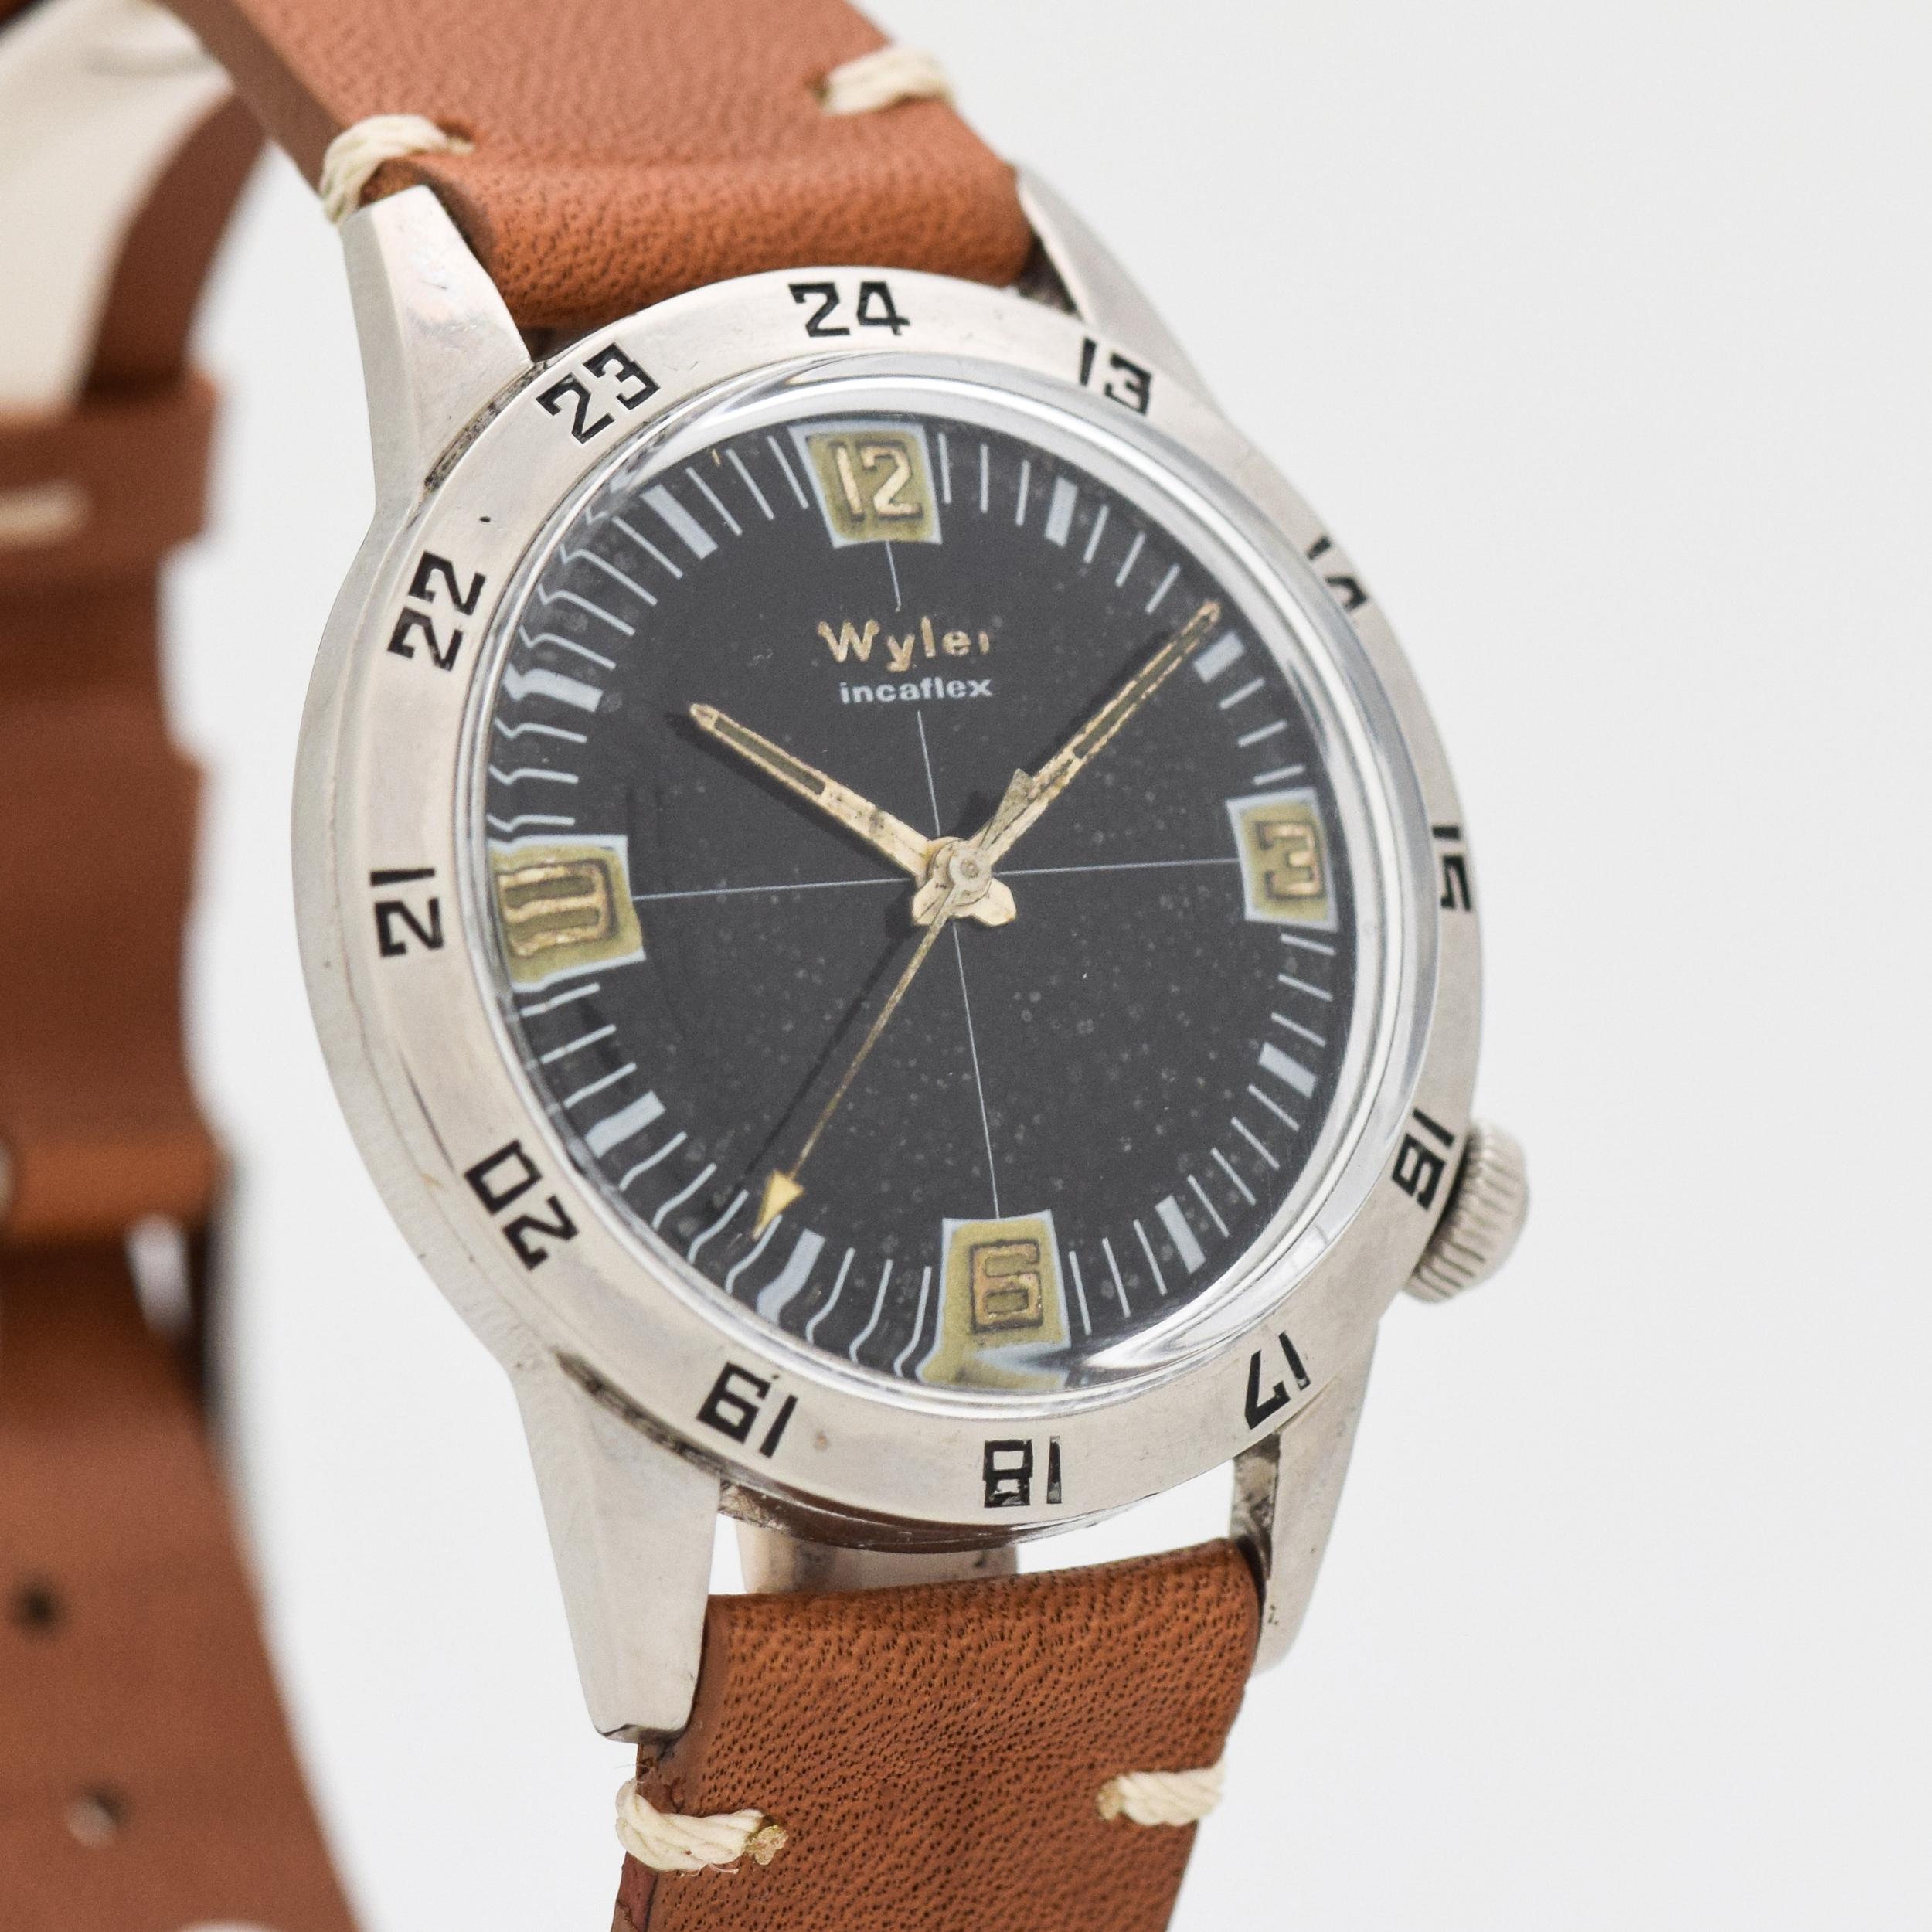 1976 Vintage Wyler Incaflex Ref. 1976-1162D Stainless Steel watch with Original Black Dial with Raised 3, 6, 9. and 12 O'clock Gold Markers. Case size, 35mm x 42mm lug to lug (1.38 in. x 1.65 in.) - Powered by a 17-jewel, manual caliber movement.